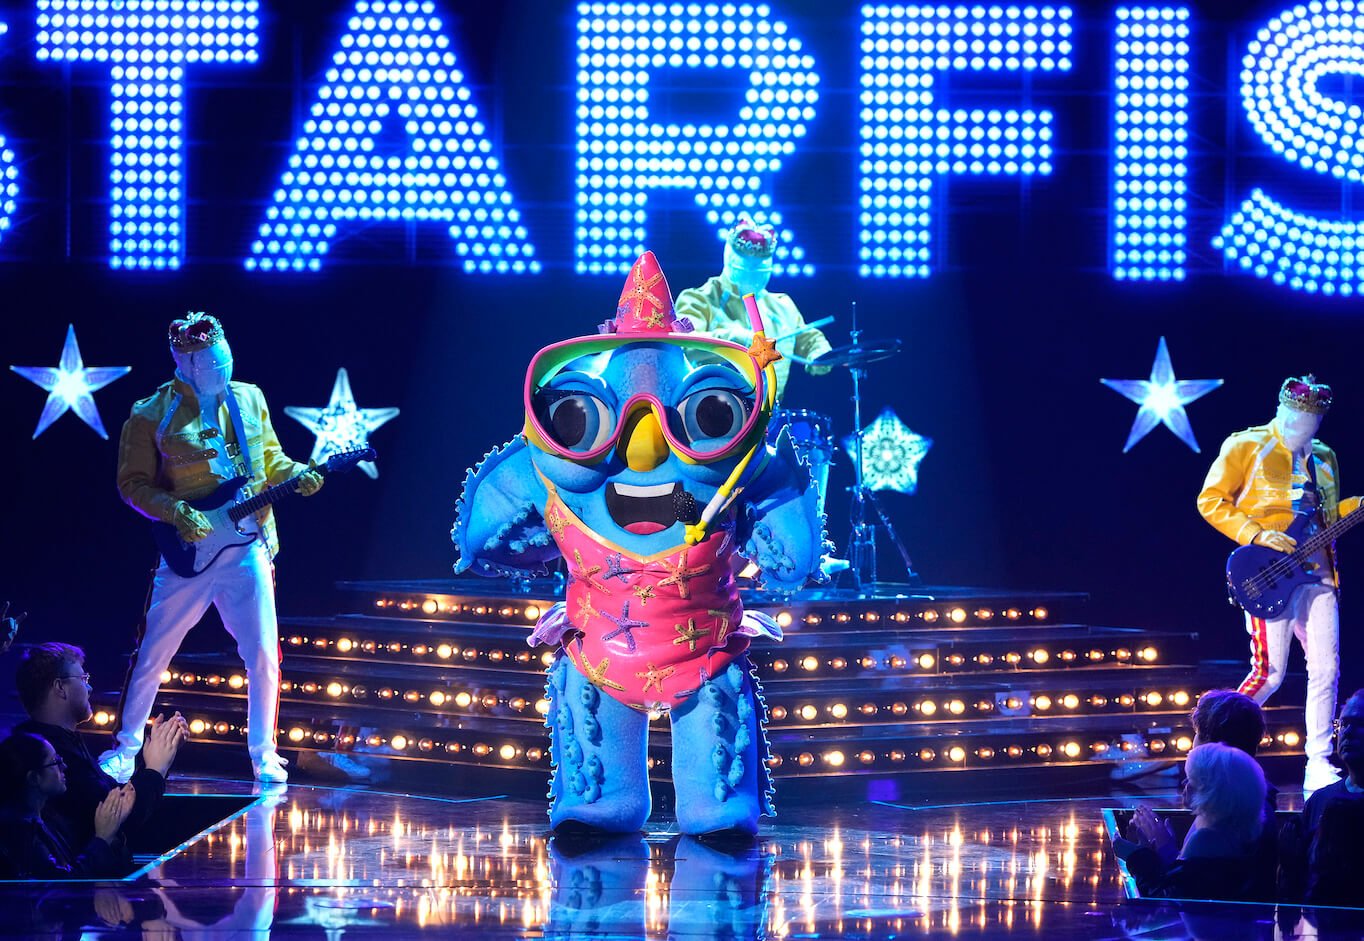 'The Masked Singer' Season 11 Group A mask Starfish on stage